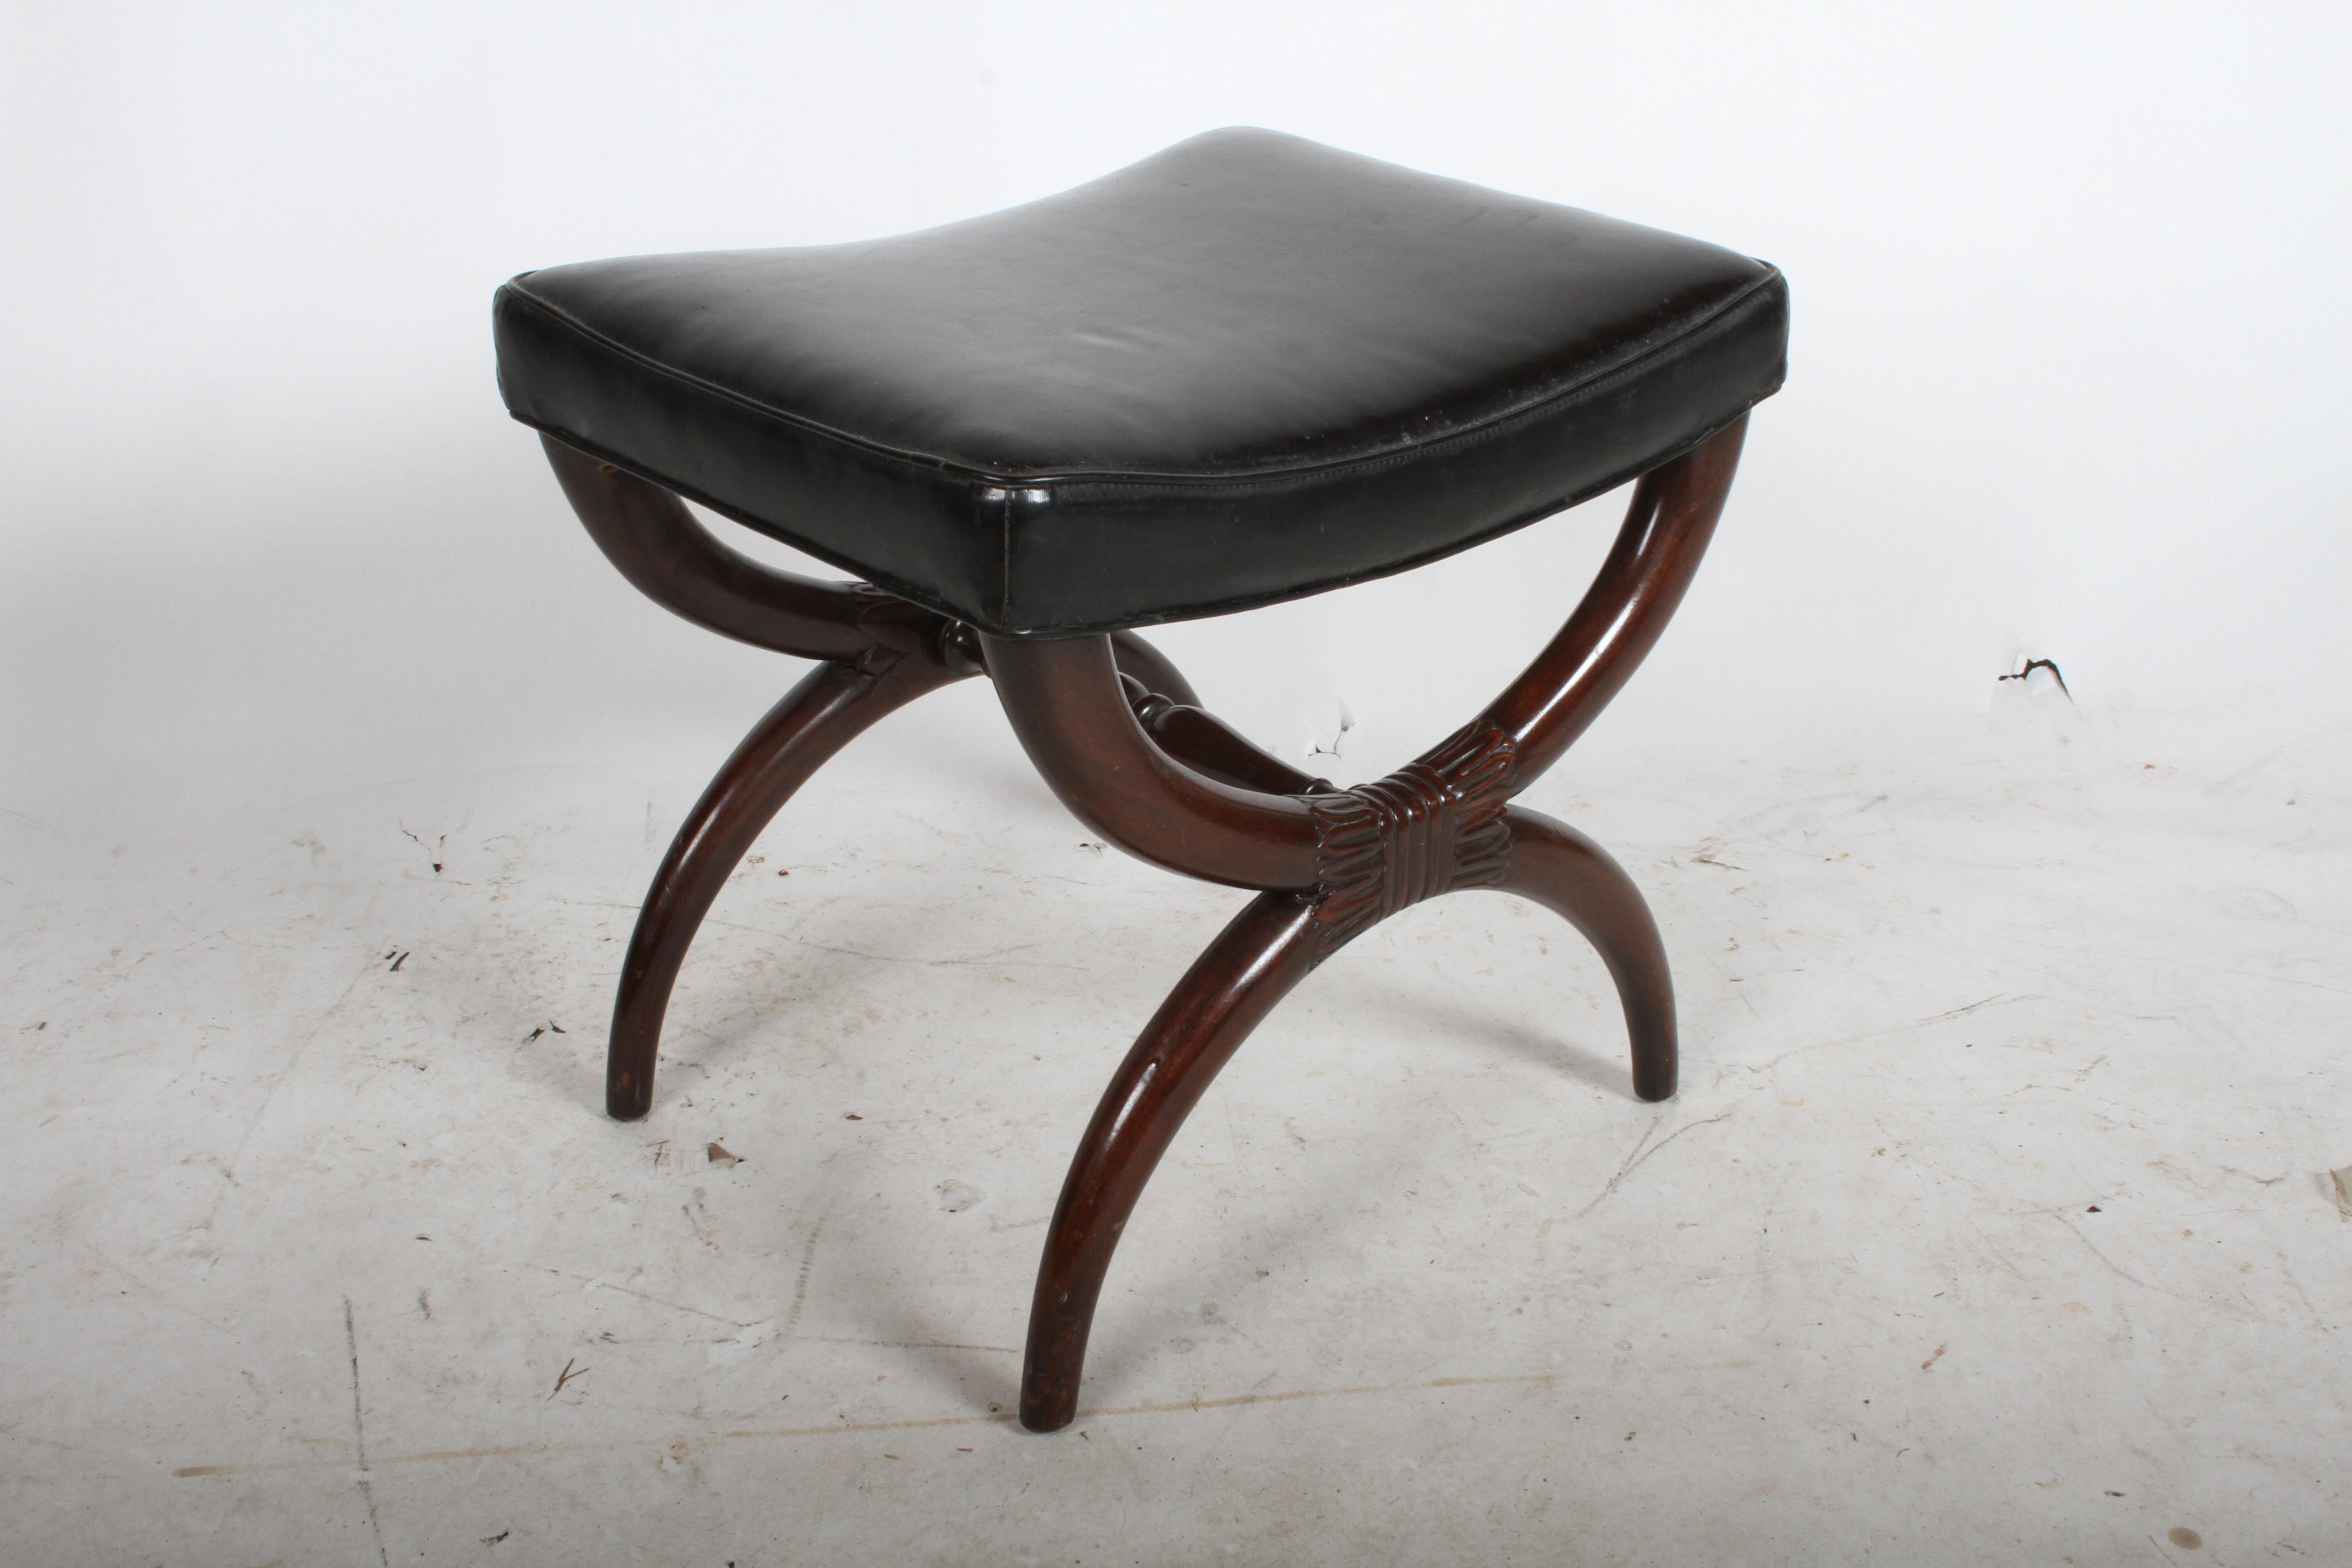 Early design for Dunbar, mahogany bench or vanity stool. X form base with neoclassical styling, and original black leather seat. Mahogany frame will be refinished prior to shipping, included in price. Black leather seat has wear, should be replaced.